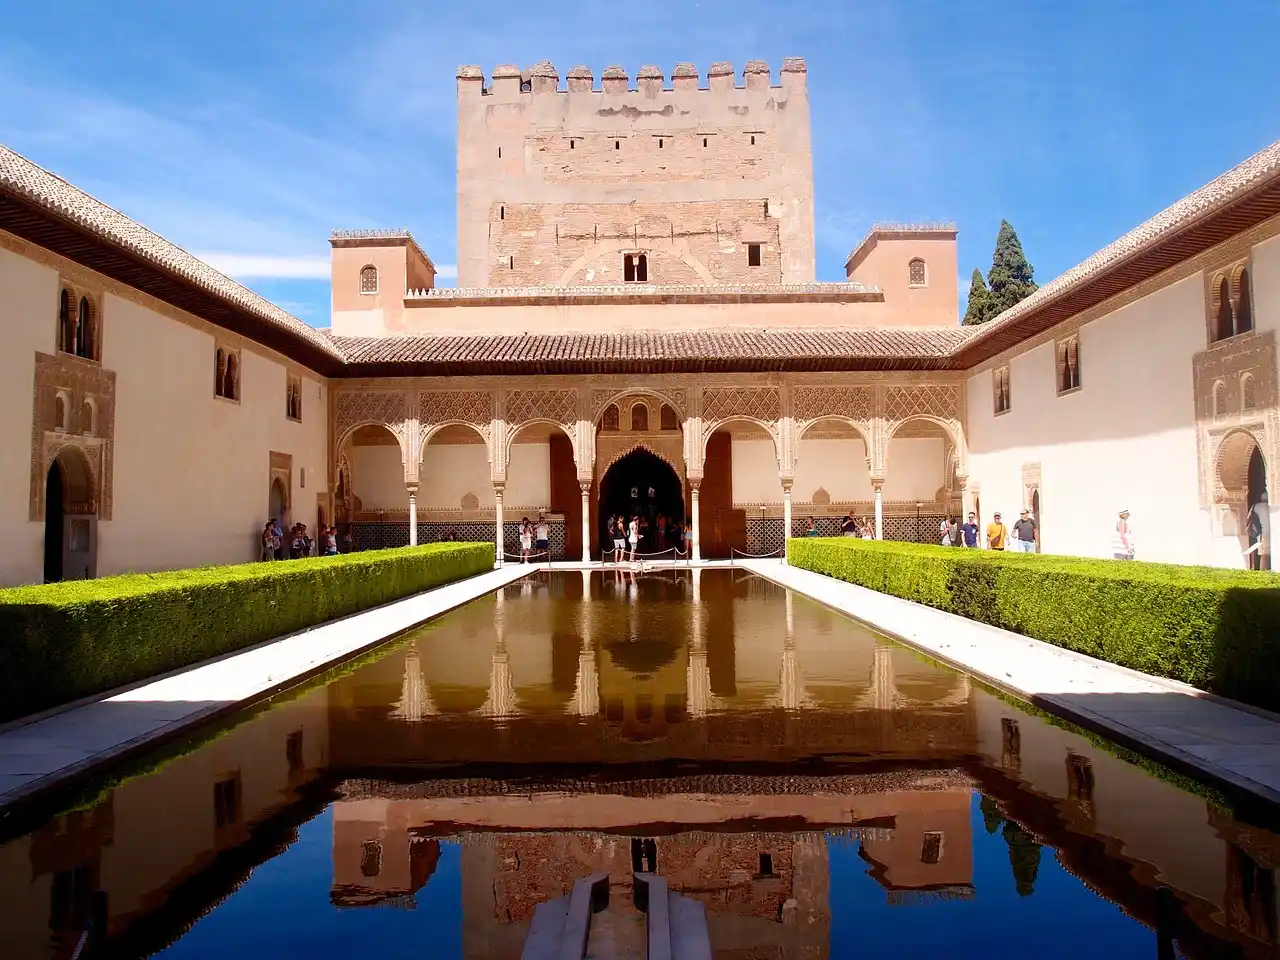 Alhambra Palace in Granada, Spain: A Majestic Masterpiece of